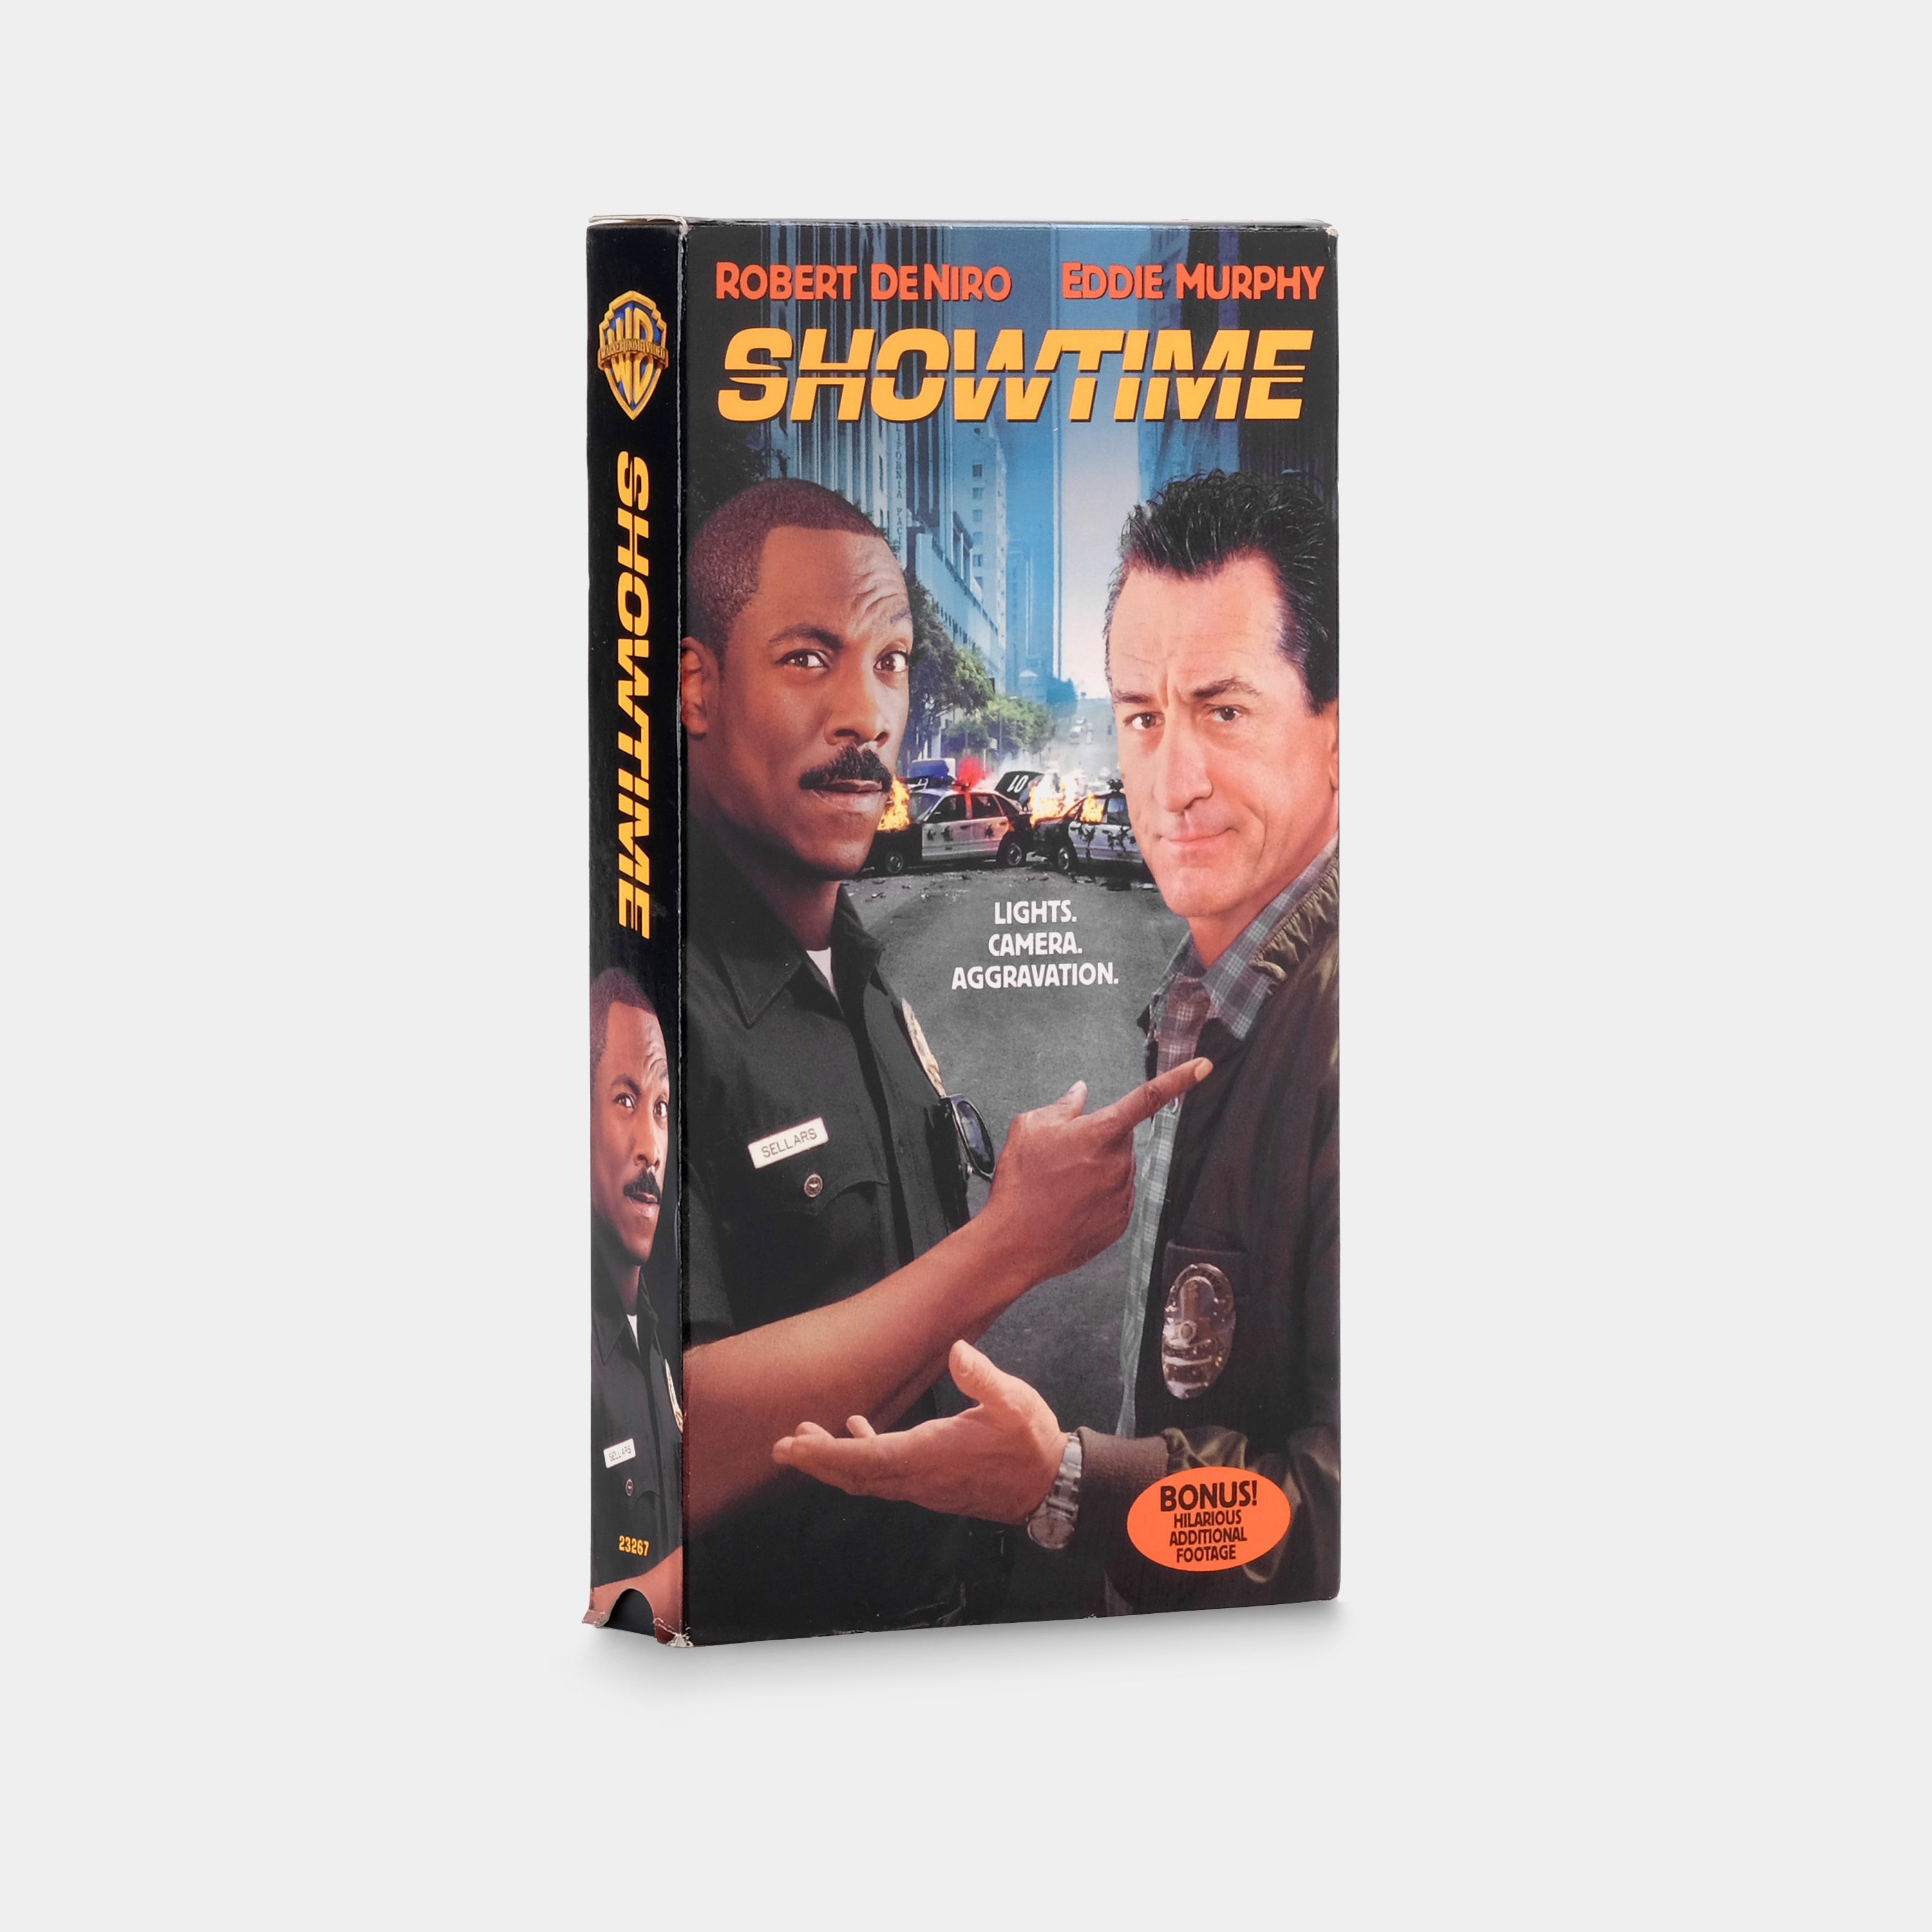 Showtime VHS Tape